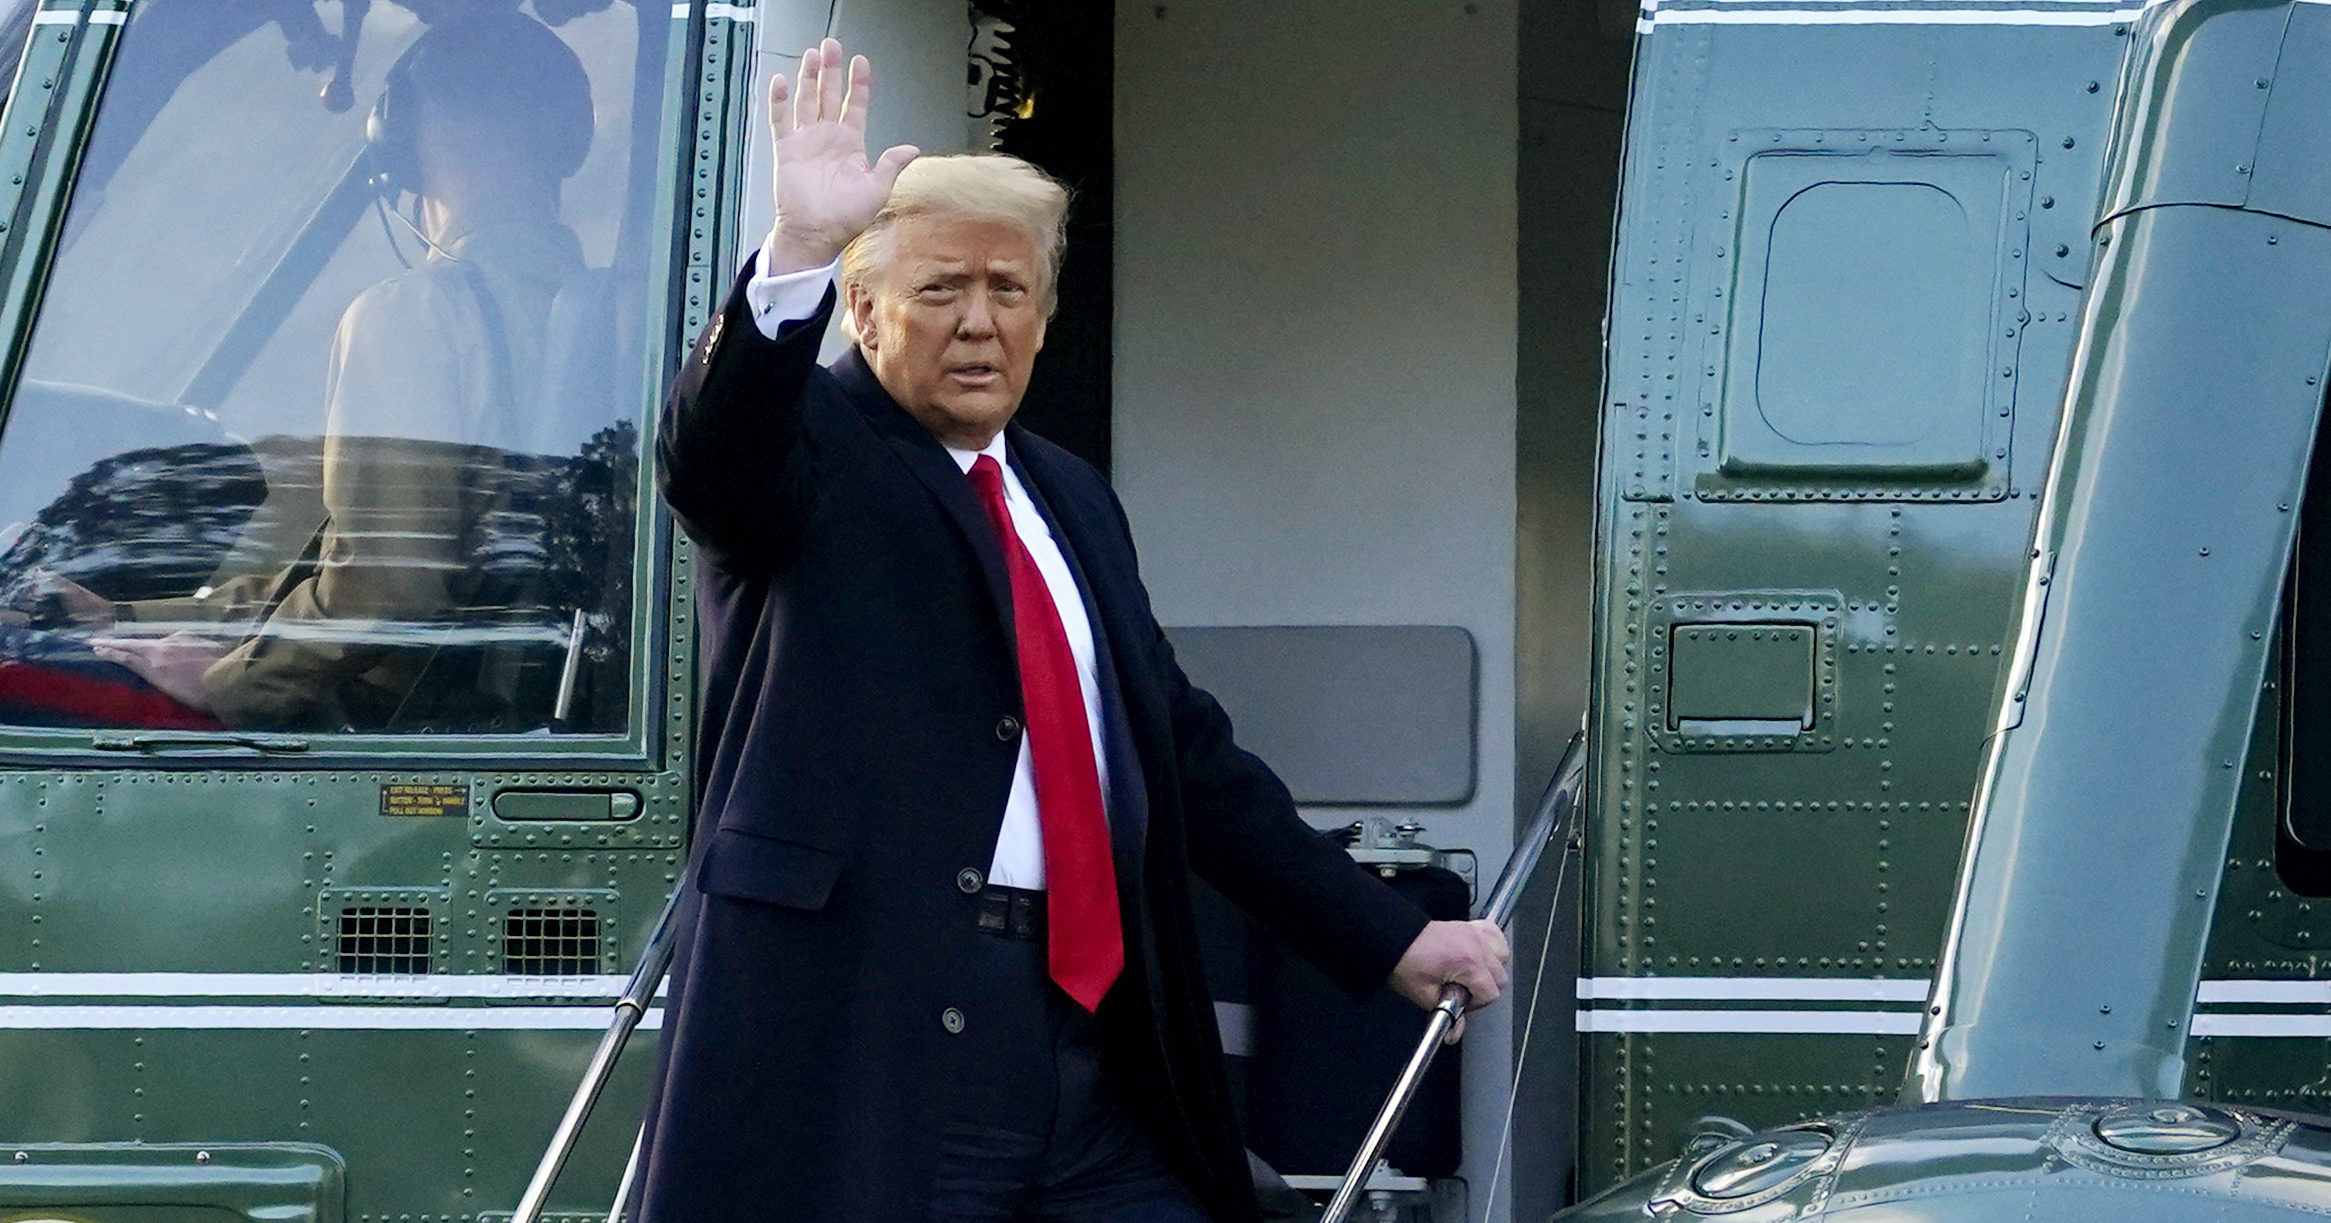 President Donald Trump waves as he boards Marine One on the South Lawn of the White House in Washington, D.C., on Jan. 20, 2021.